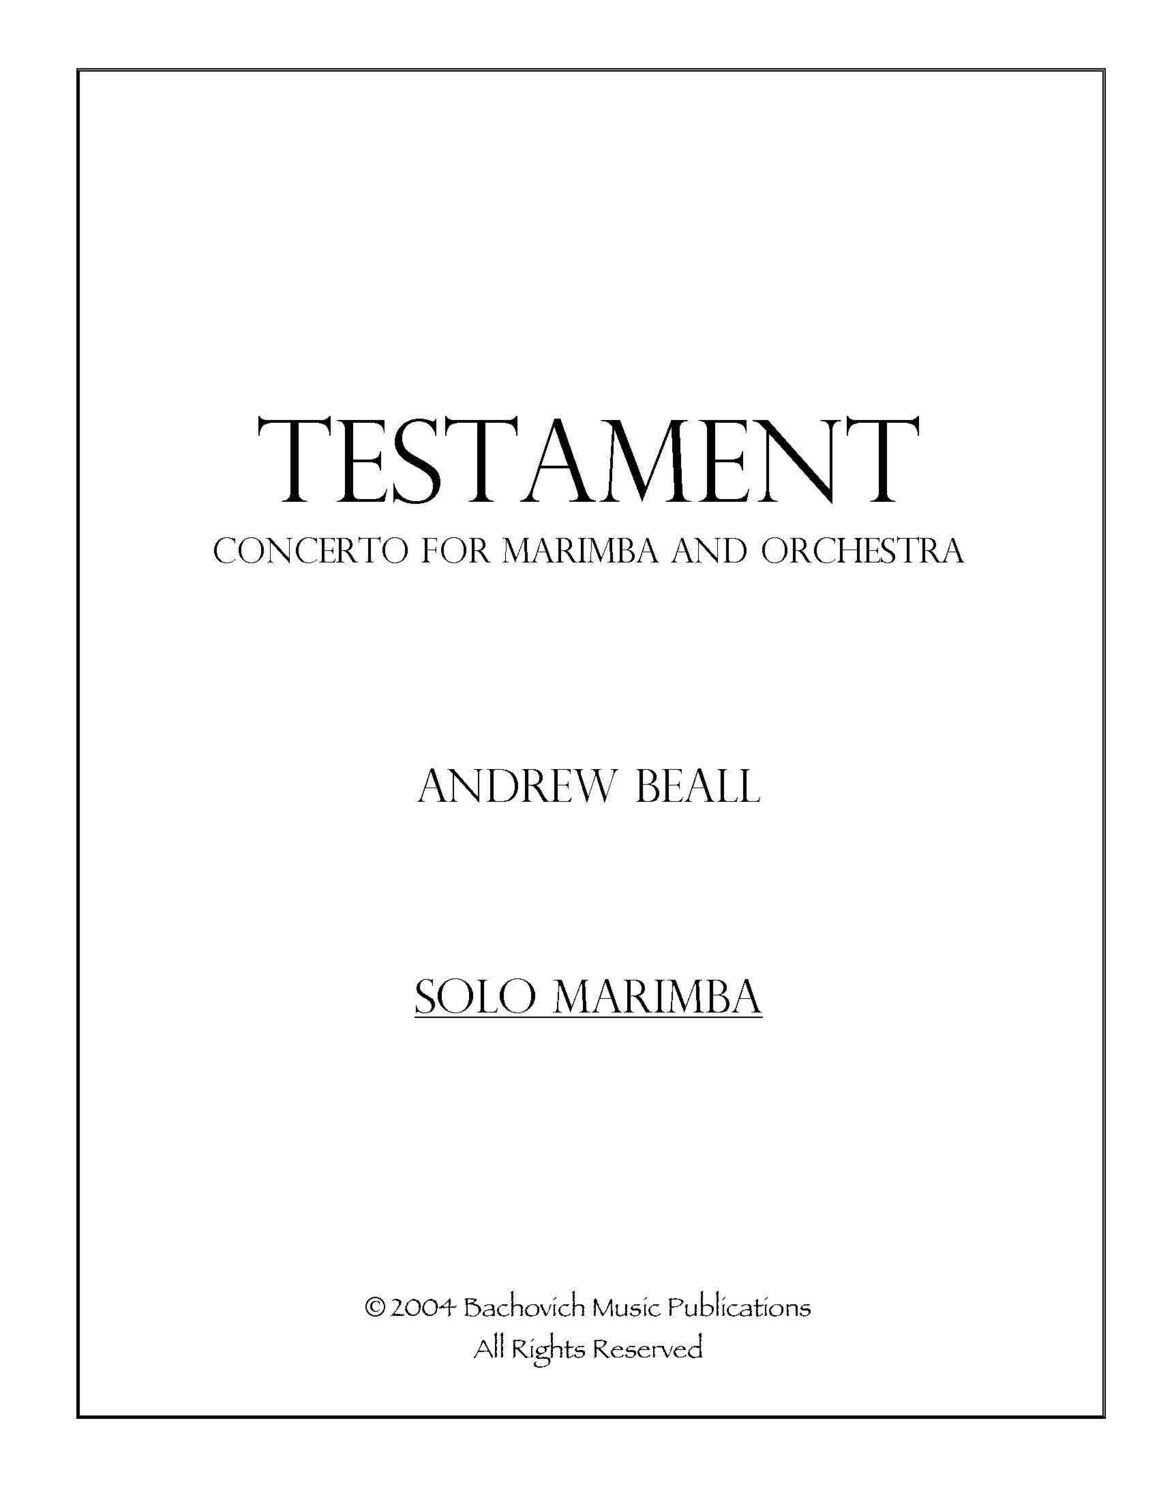 Andrew Beall: Testament: Concerto for marimba and orchestra (Study Score)